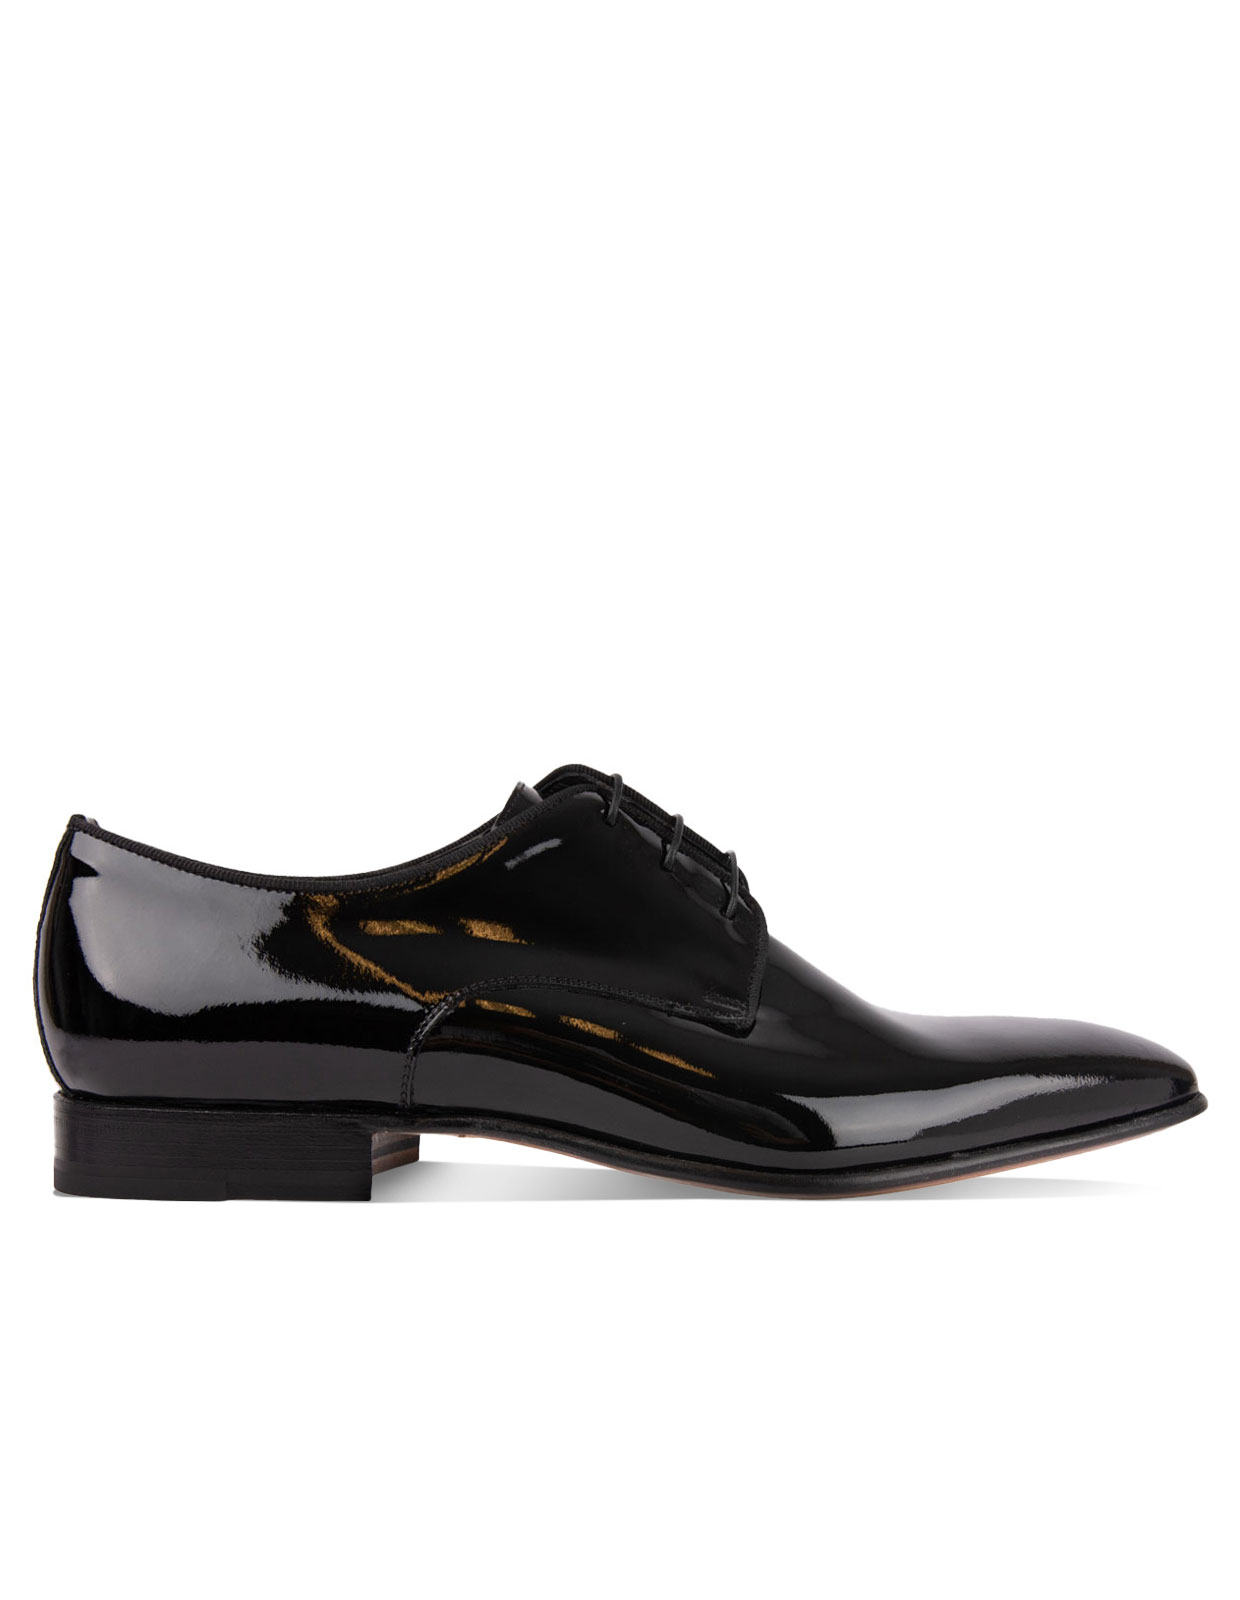 Lille Patent Leather Derby Shoes Black Stl 8.5